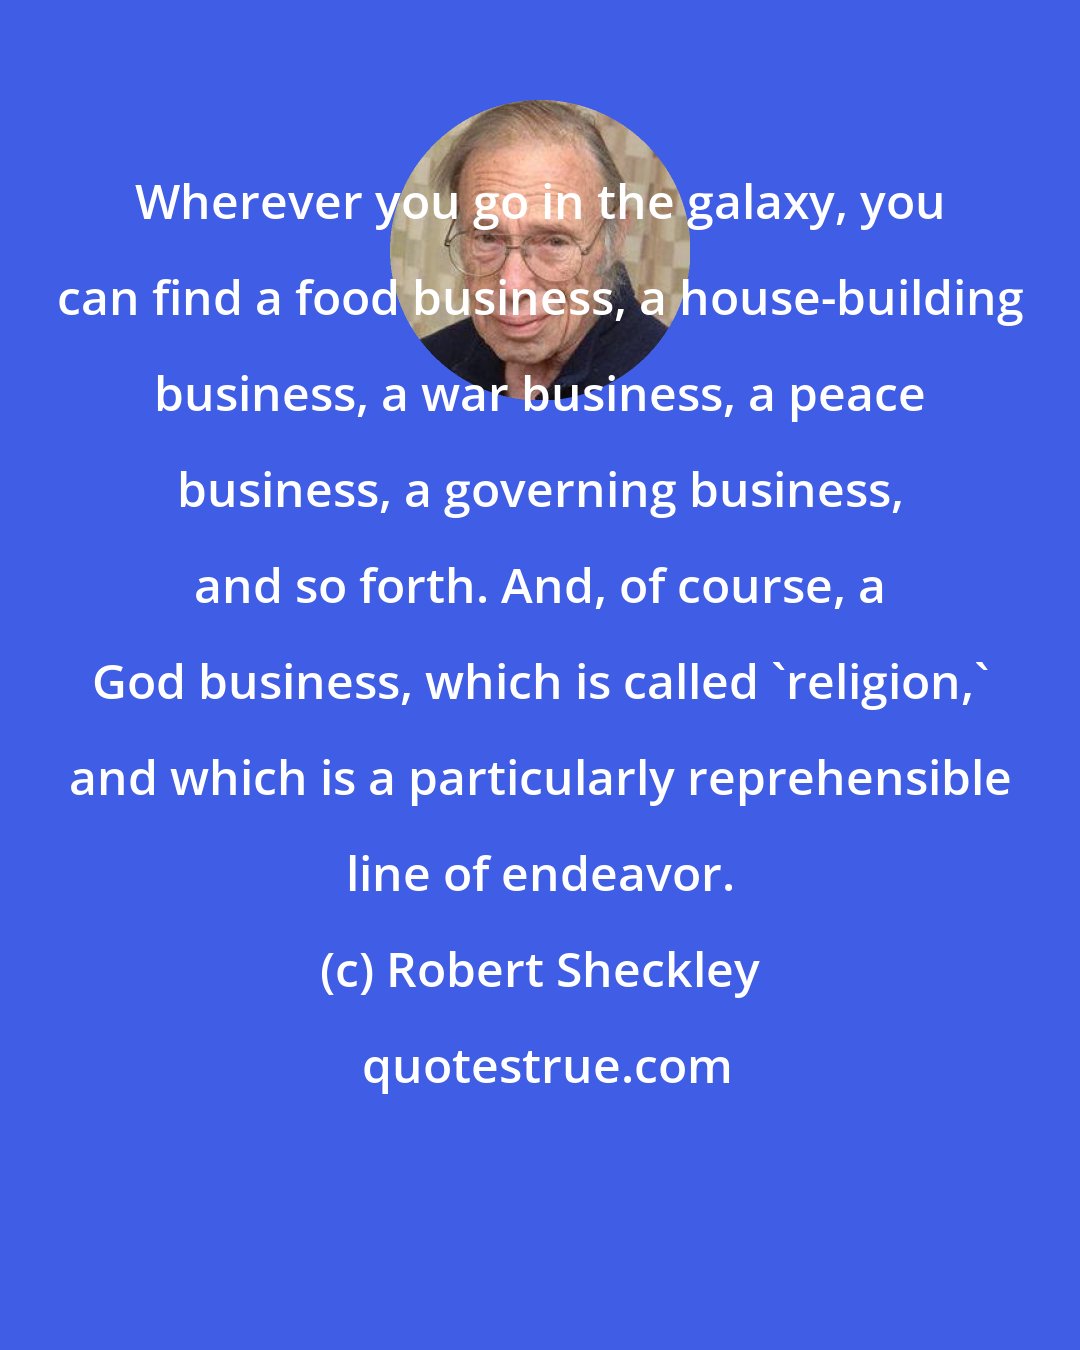 Robert Sheckley: Wherever you go in the galaxy, you can find a food business, a house-building business, a war business, a peace business, a governing business, and so forth. And, of course, a God business, which is called 'religion,' and which is a particularly reprehensible line of endeavor.